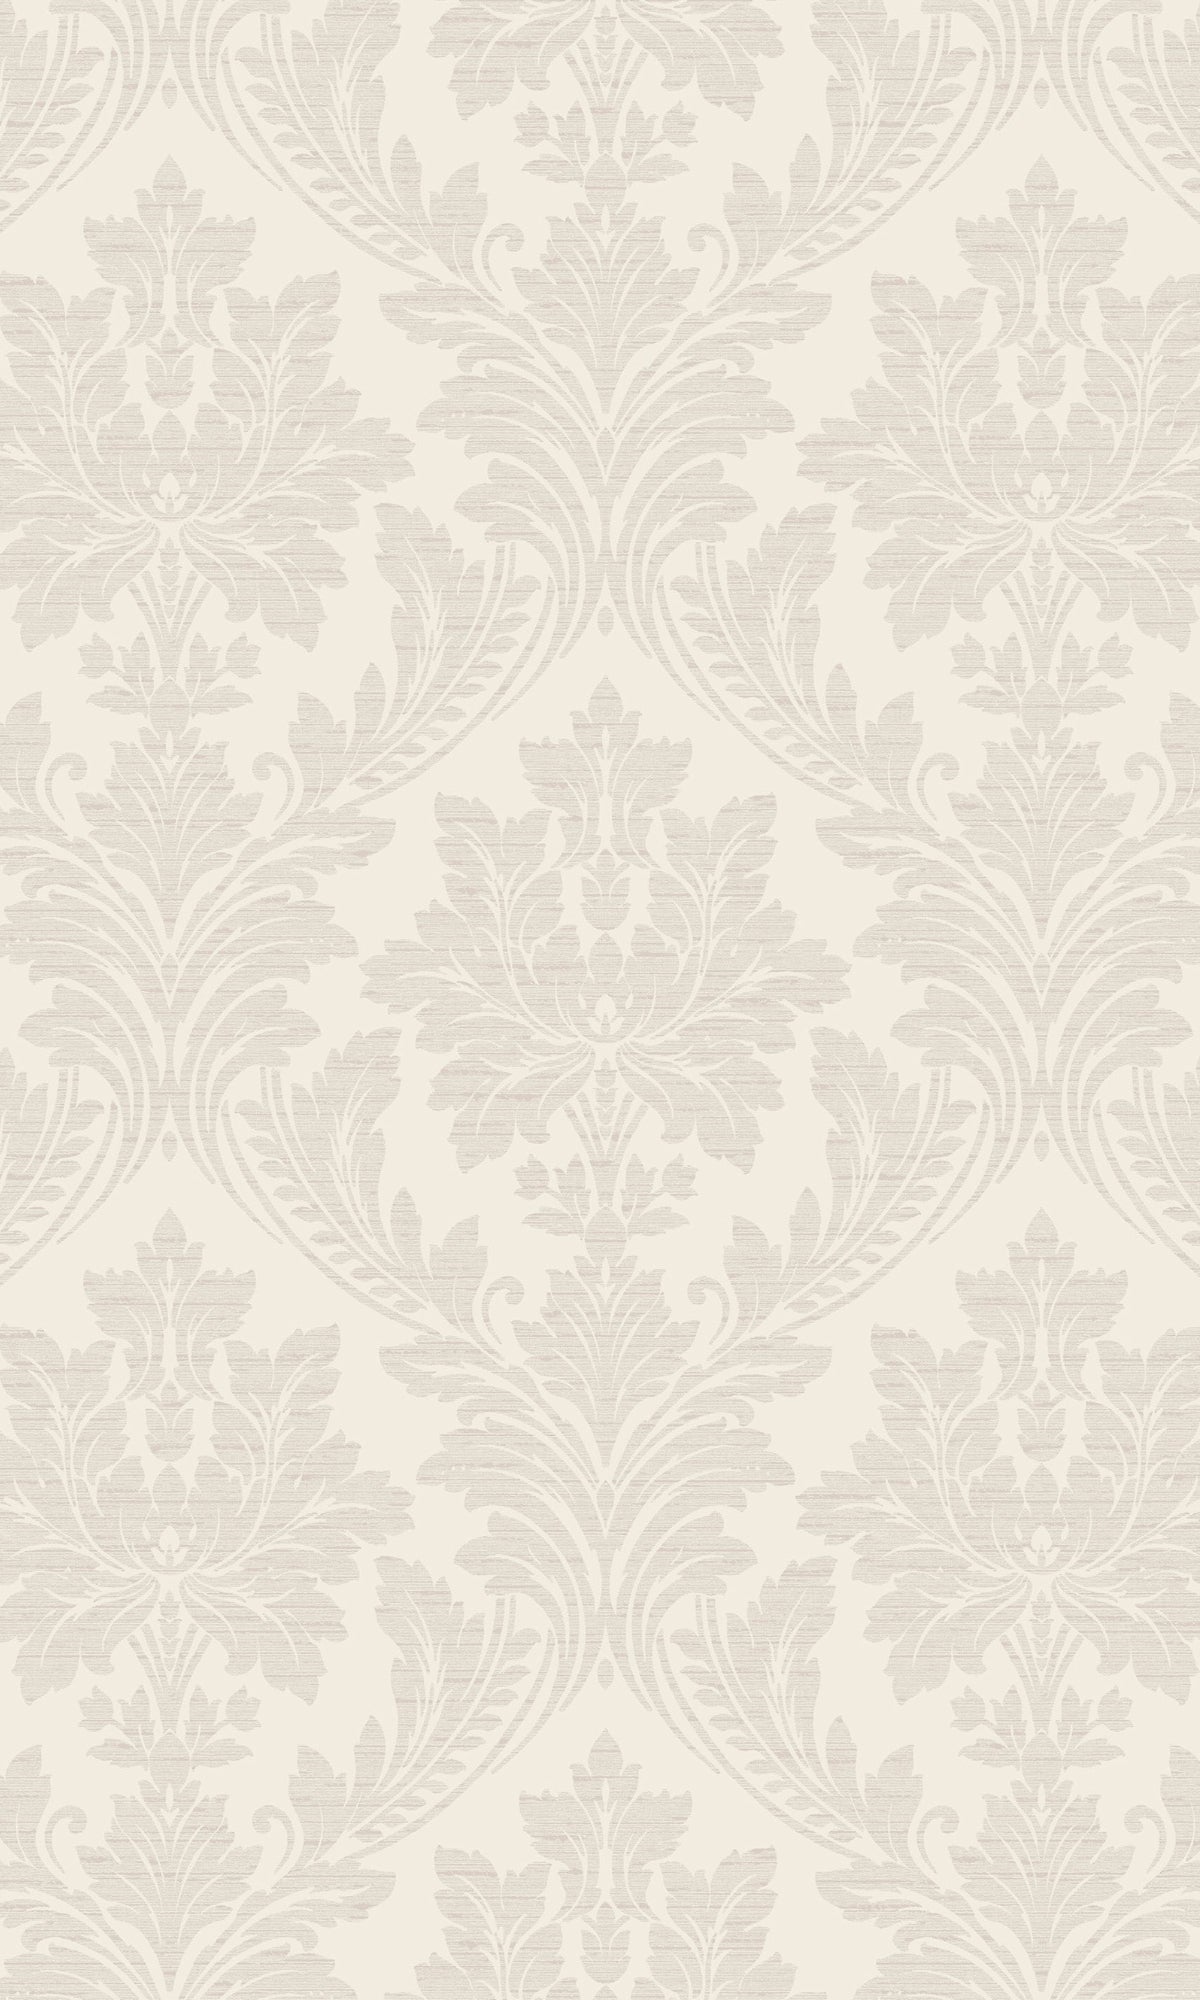 Taupe Classic Floral Damask Wallpaper R9206